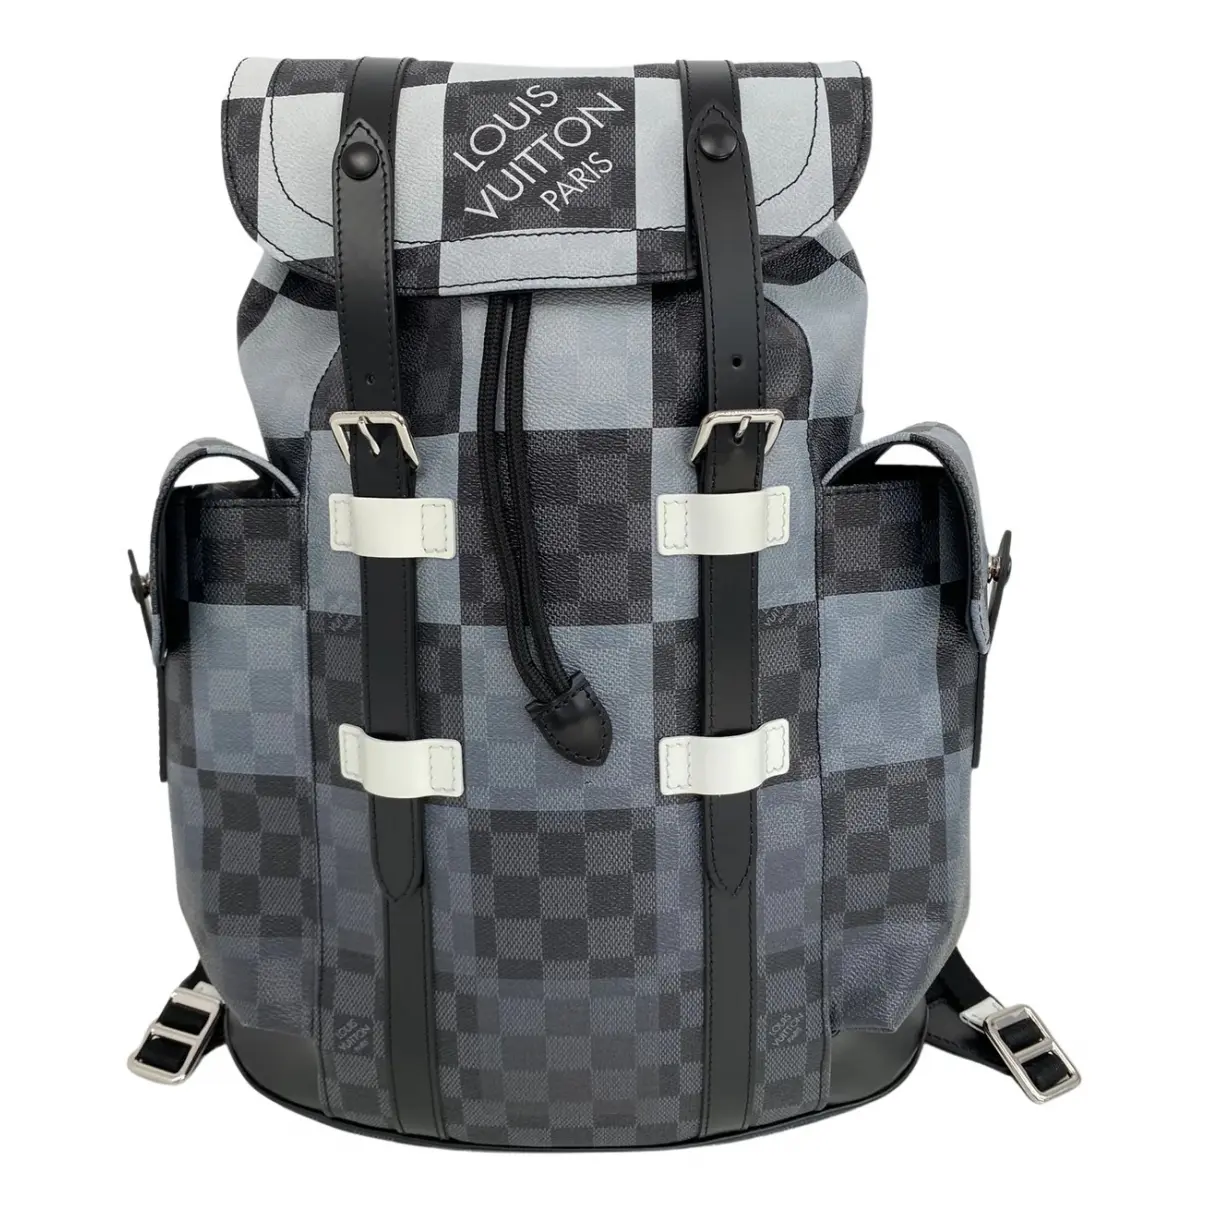 Christopher Backpack leather bag Louis Vuitton